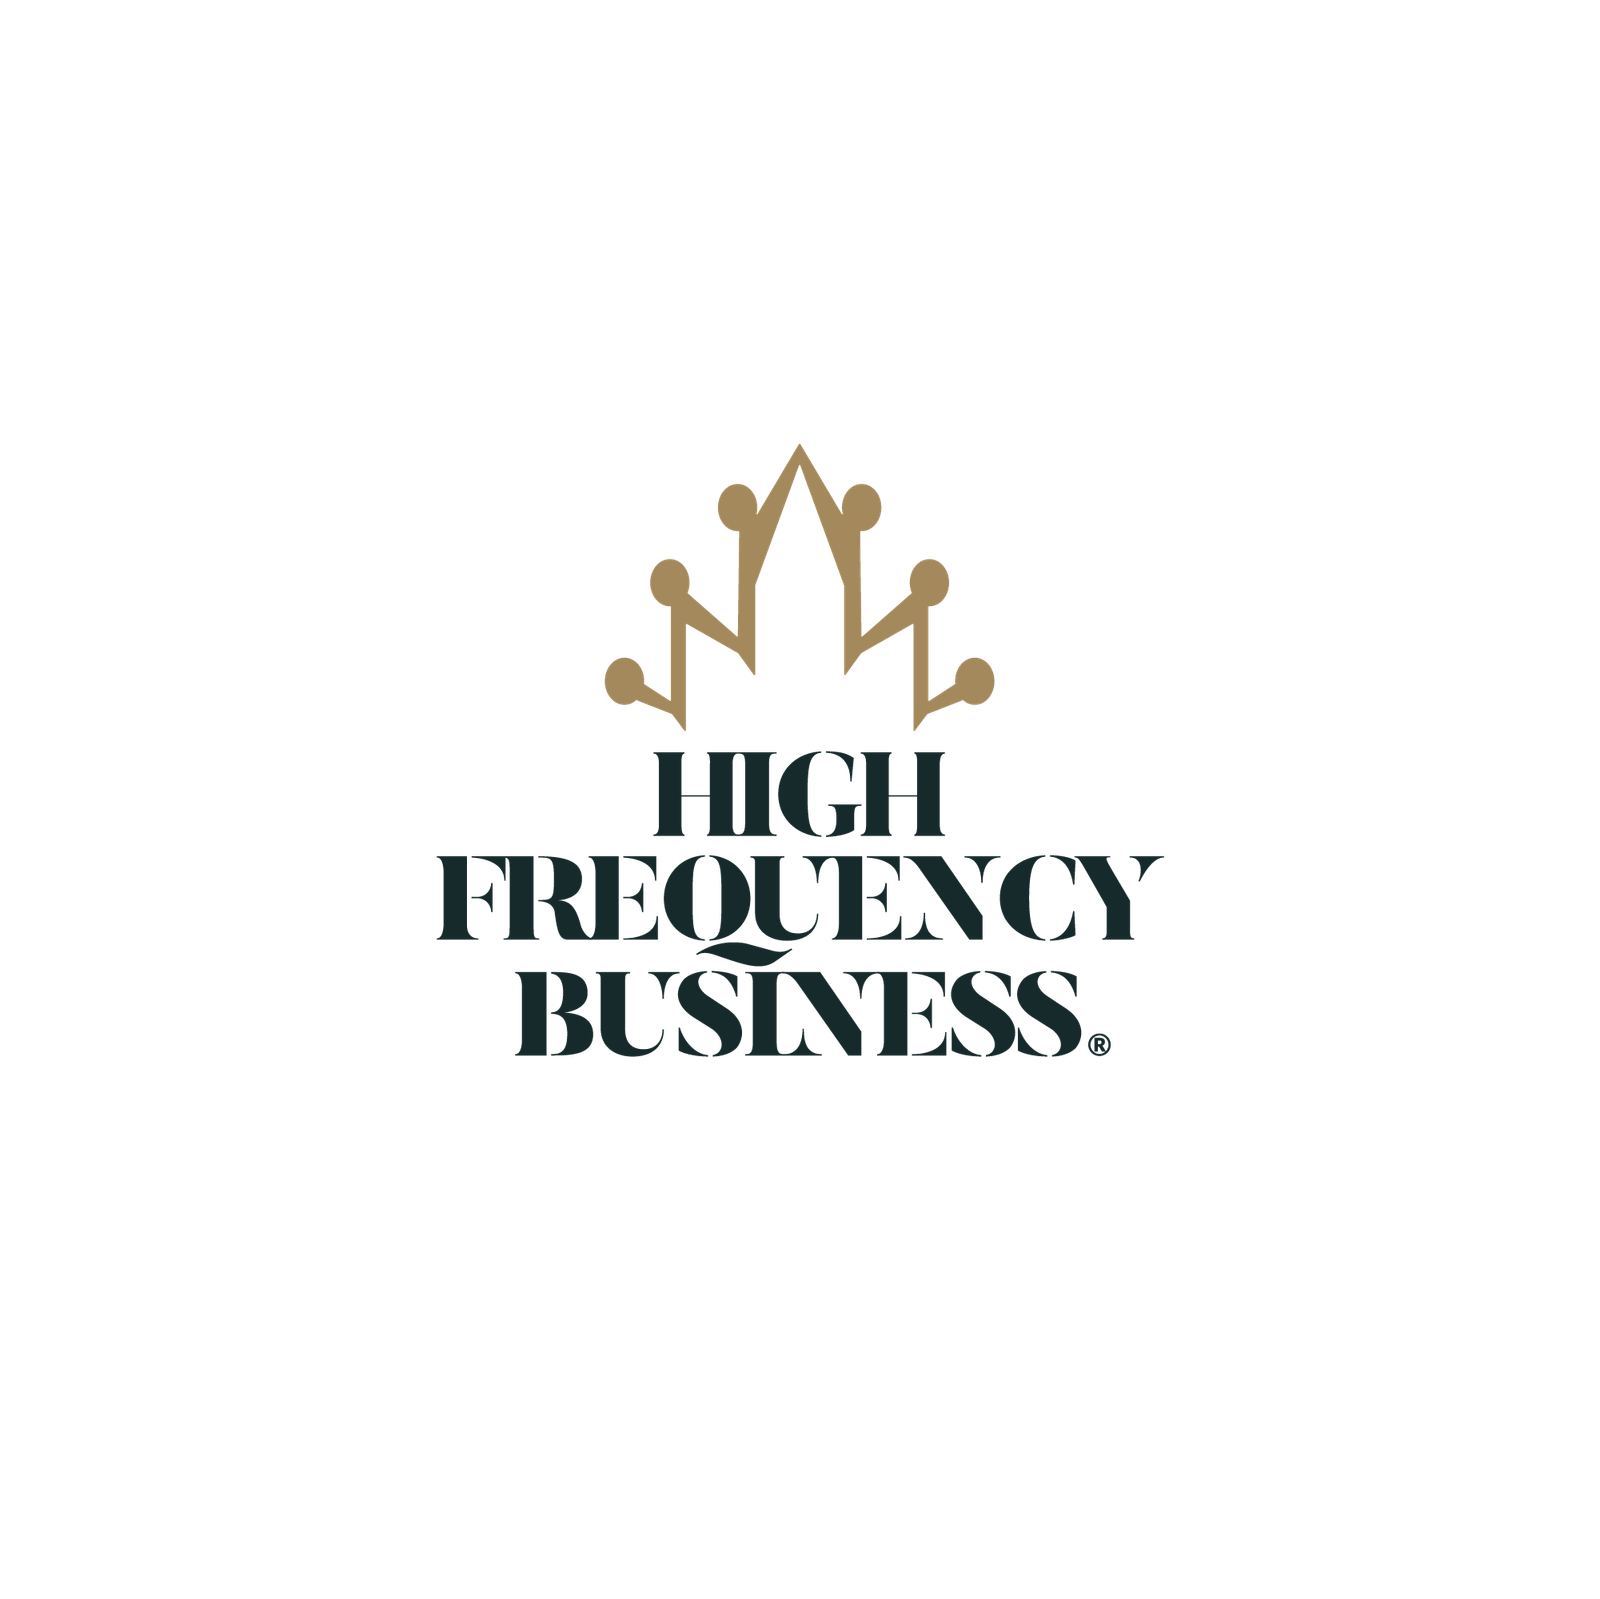 High Frequency Business